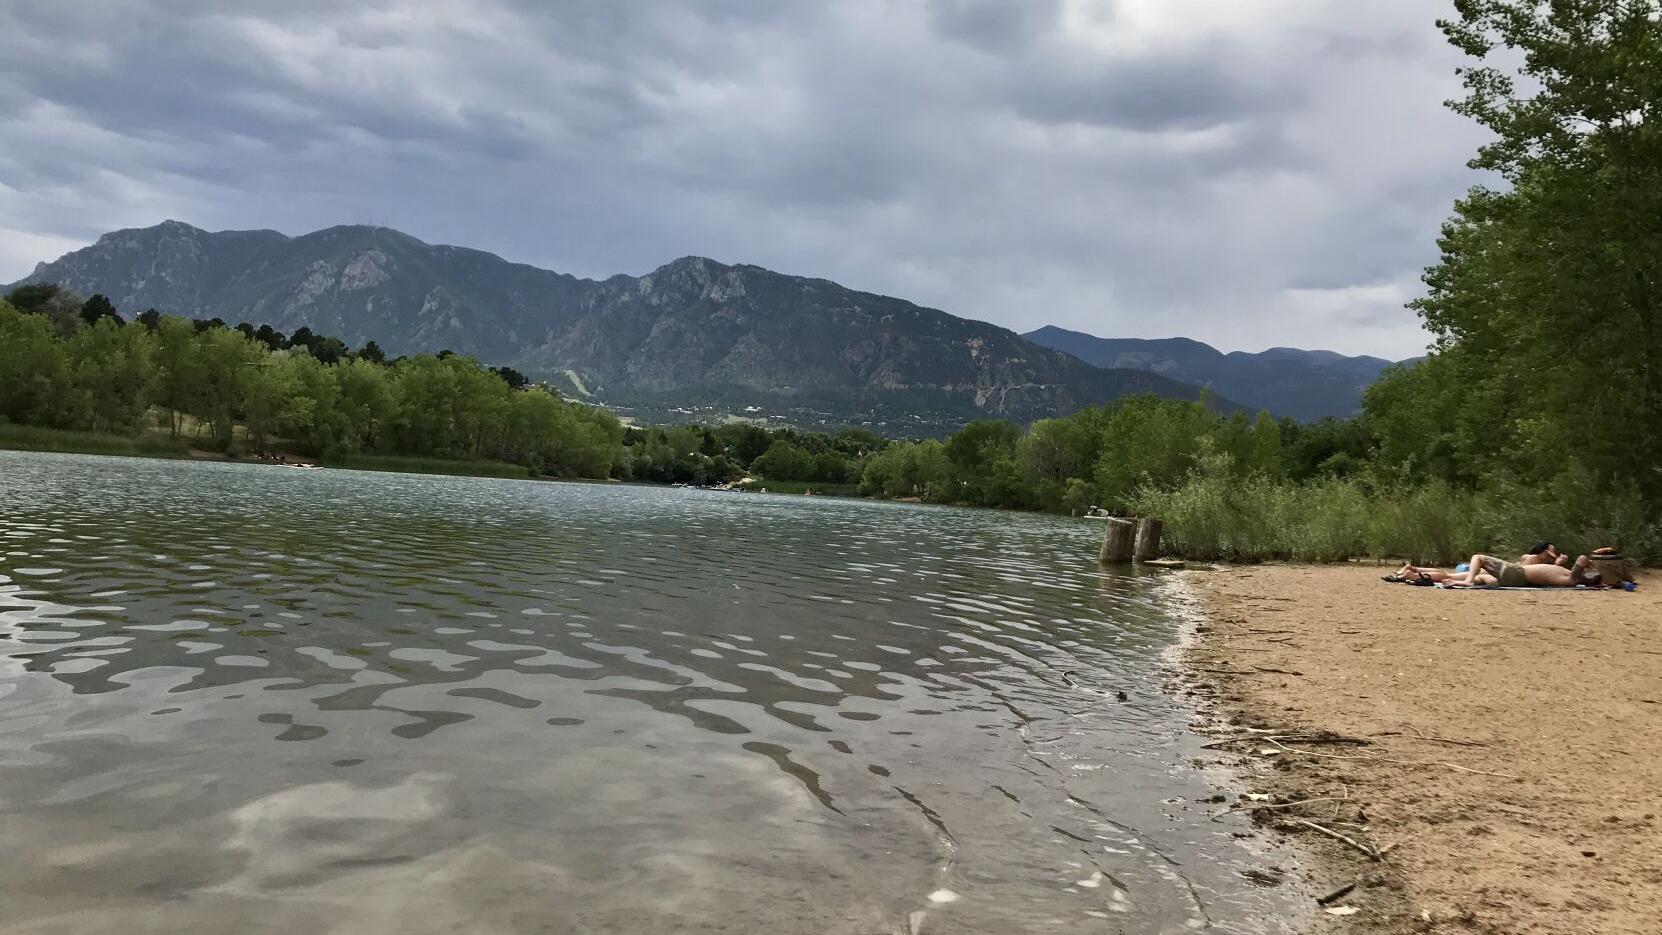 Happy Trails This Lake Is A Classic Scene Of Summer In Colorado Springs Lifestyle Gazette Com